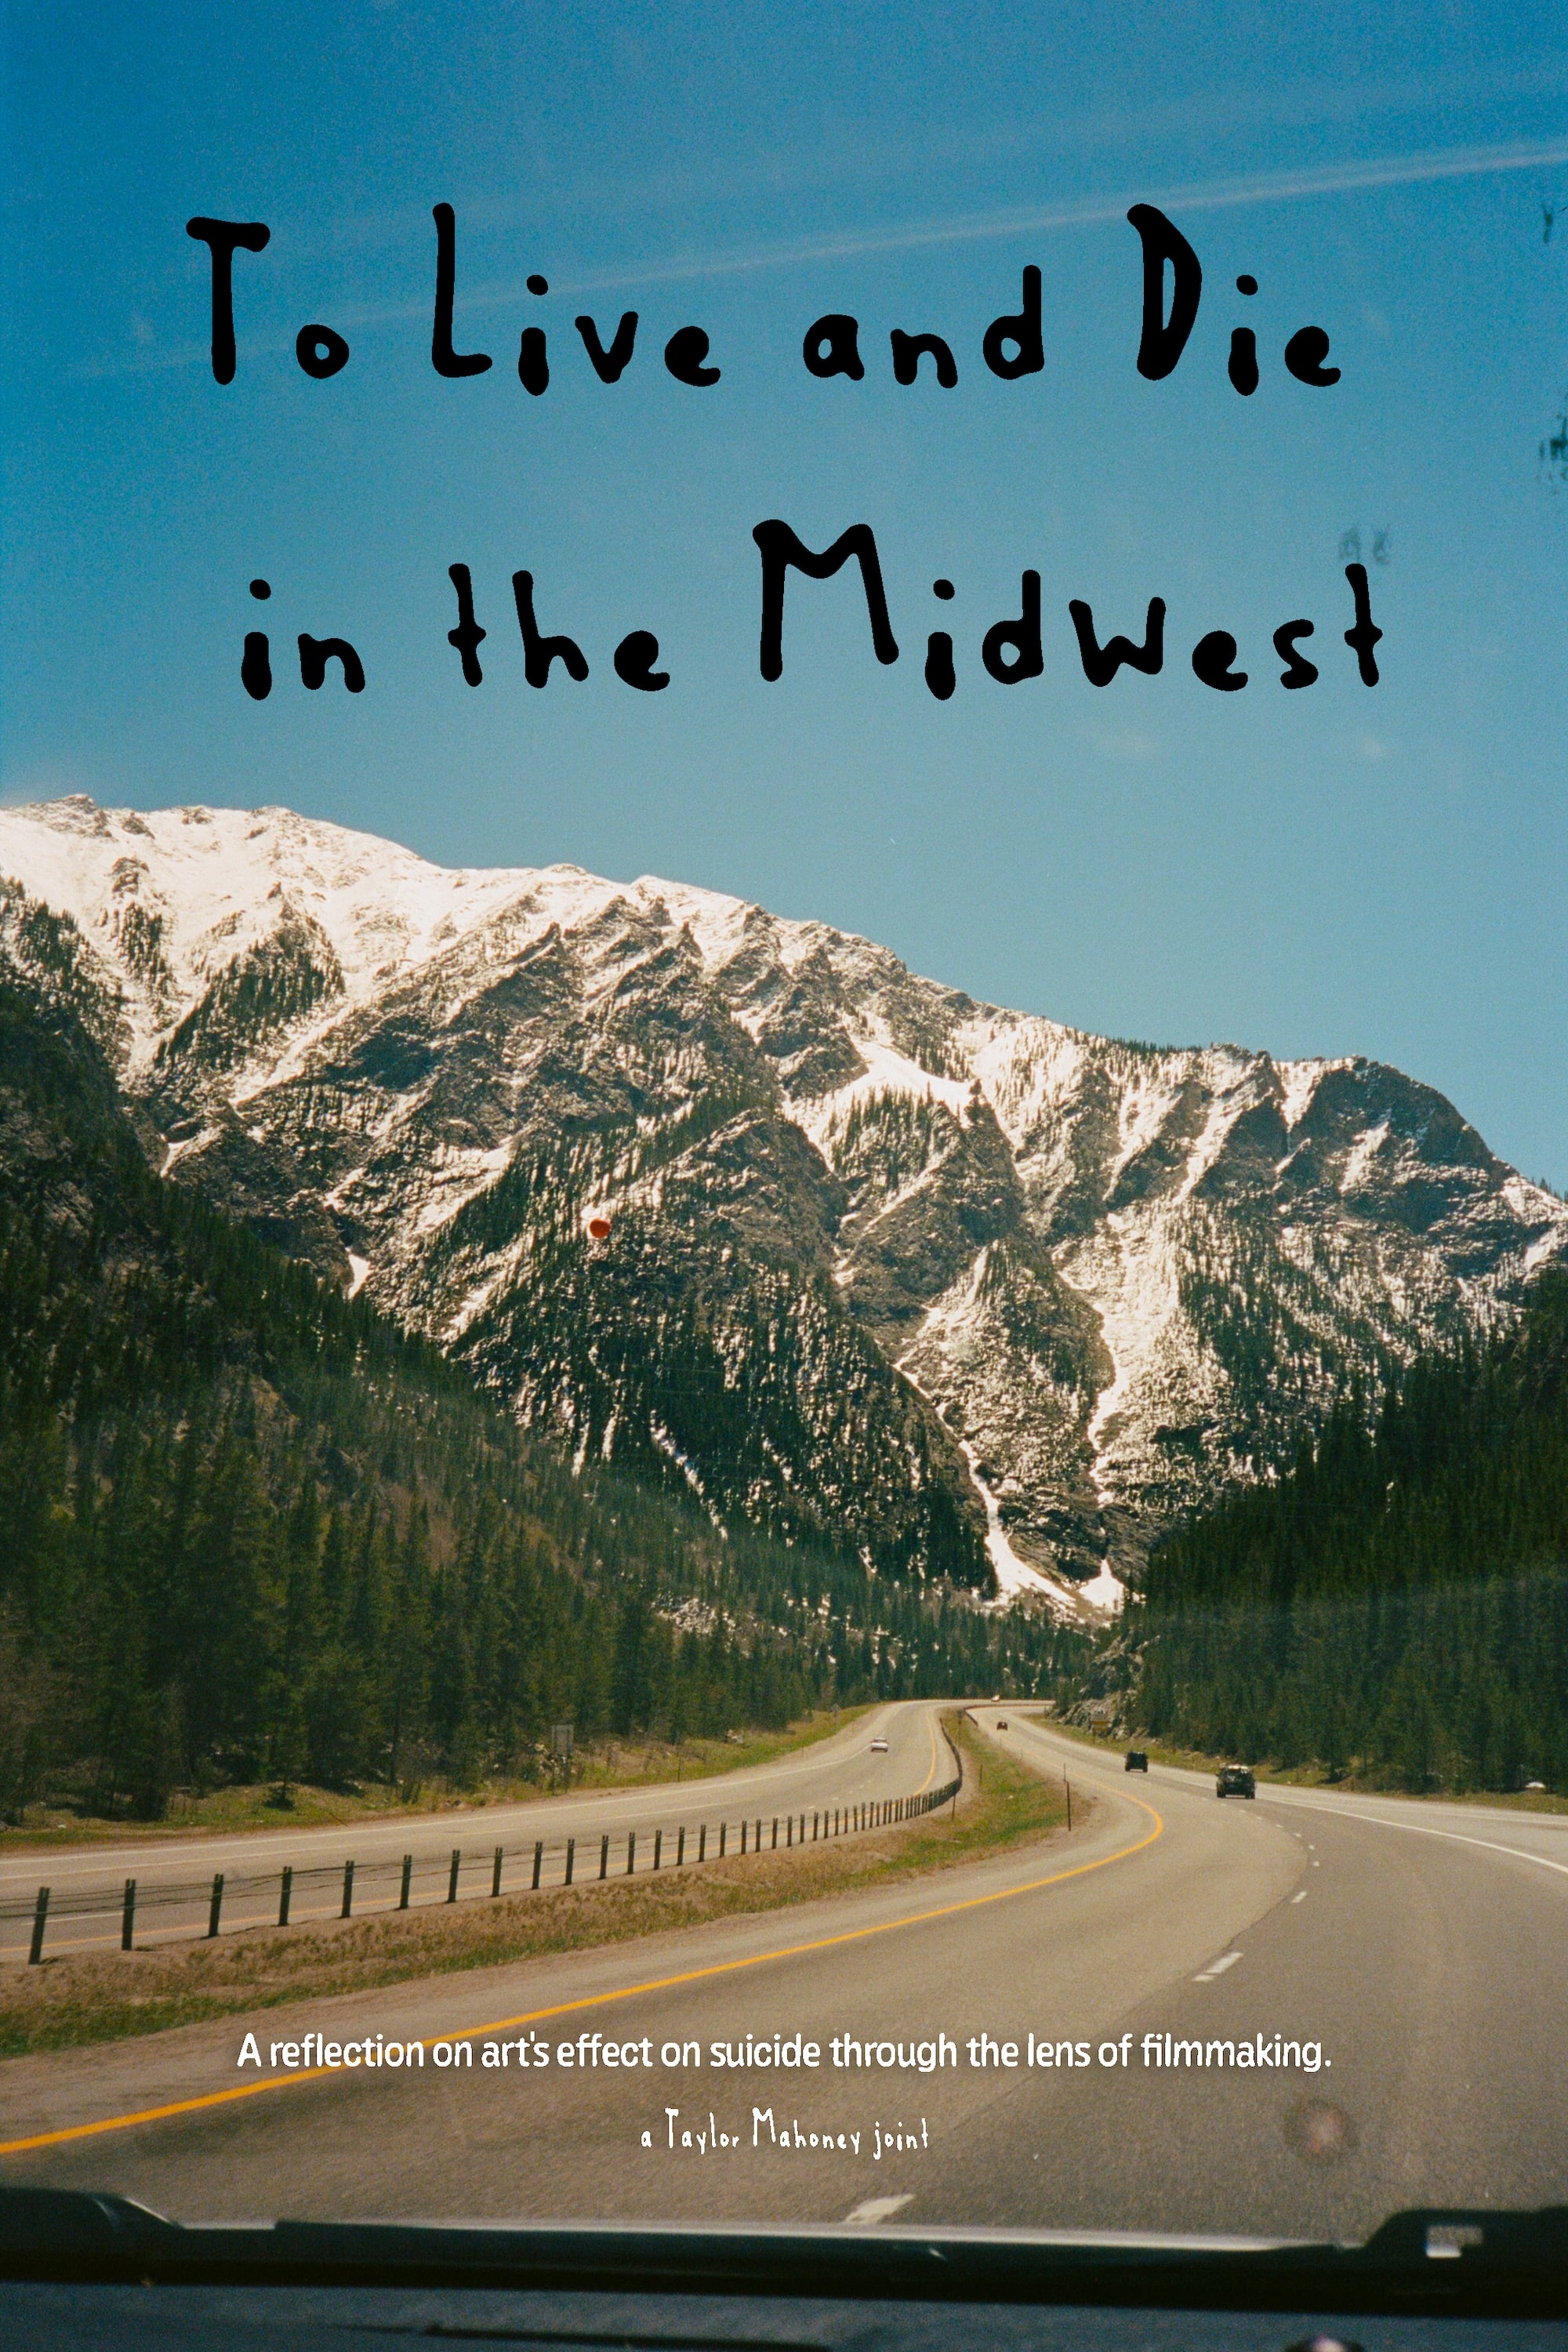 To Live and Die in the Midwest